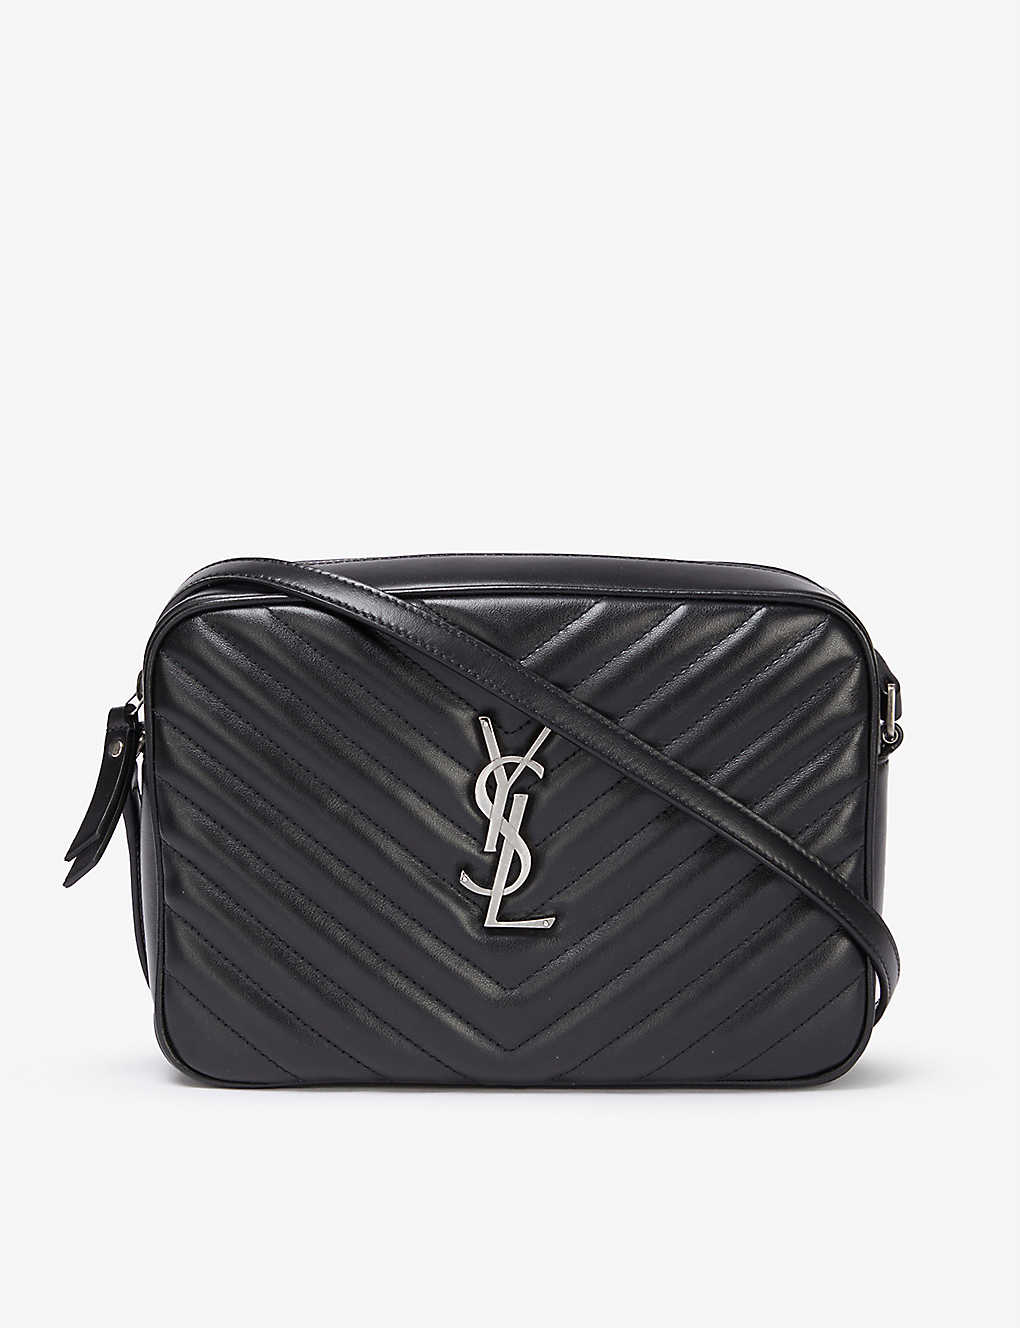 SAINT LAURENT - Lou quilted leather camera bag